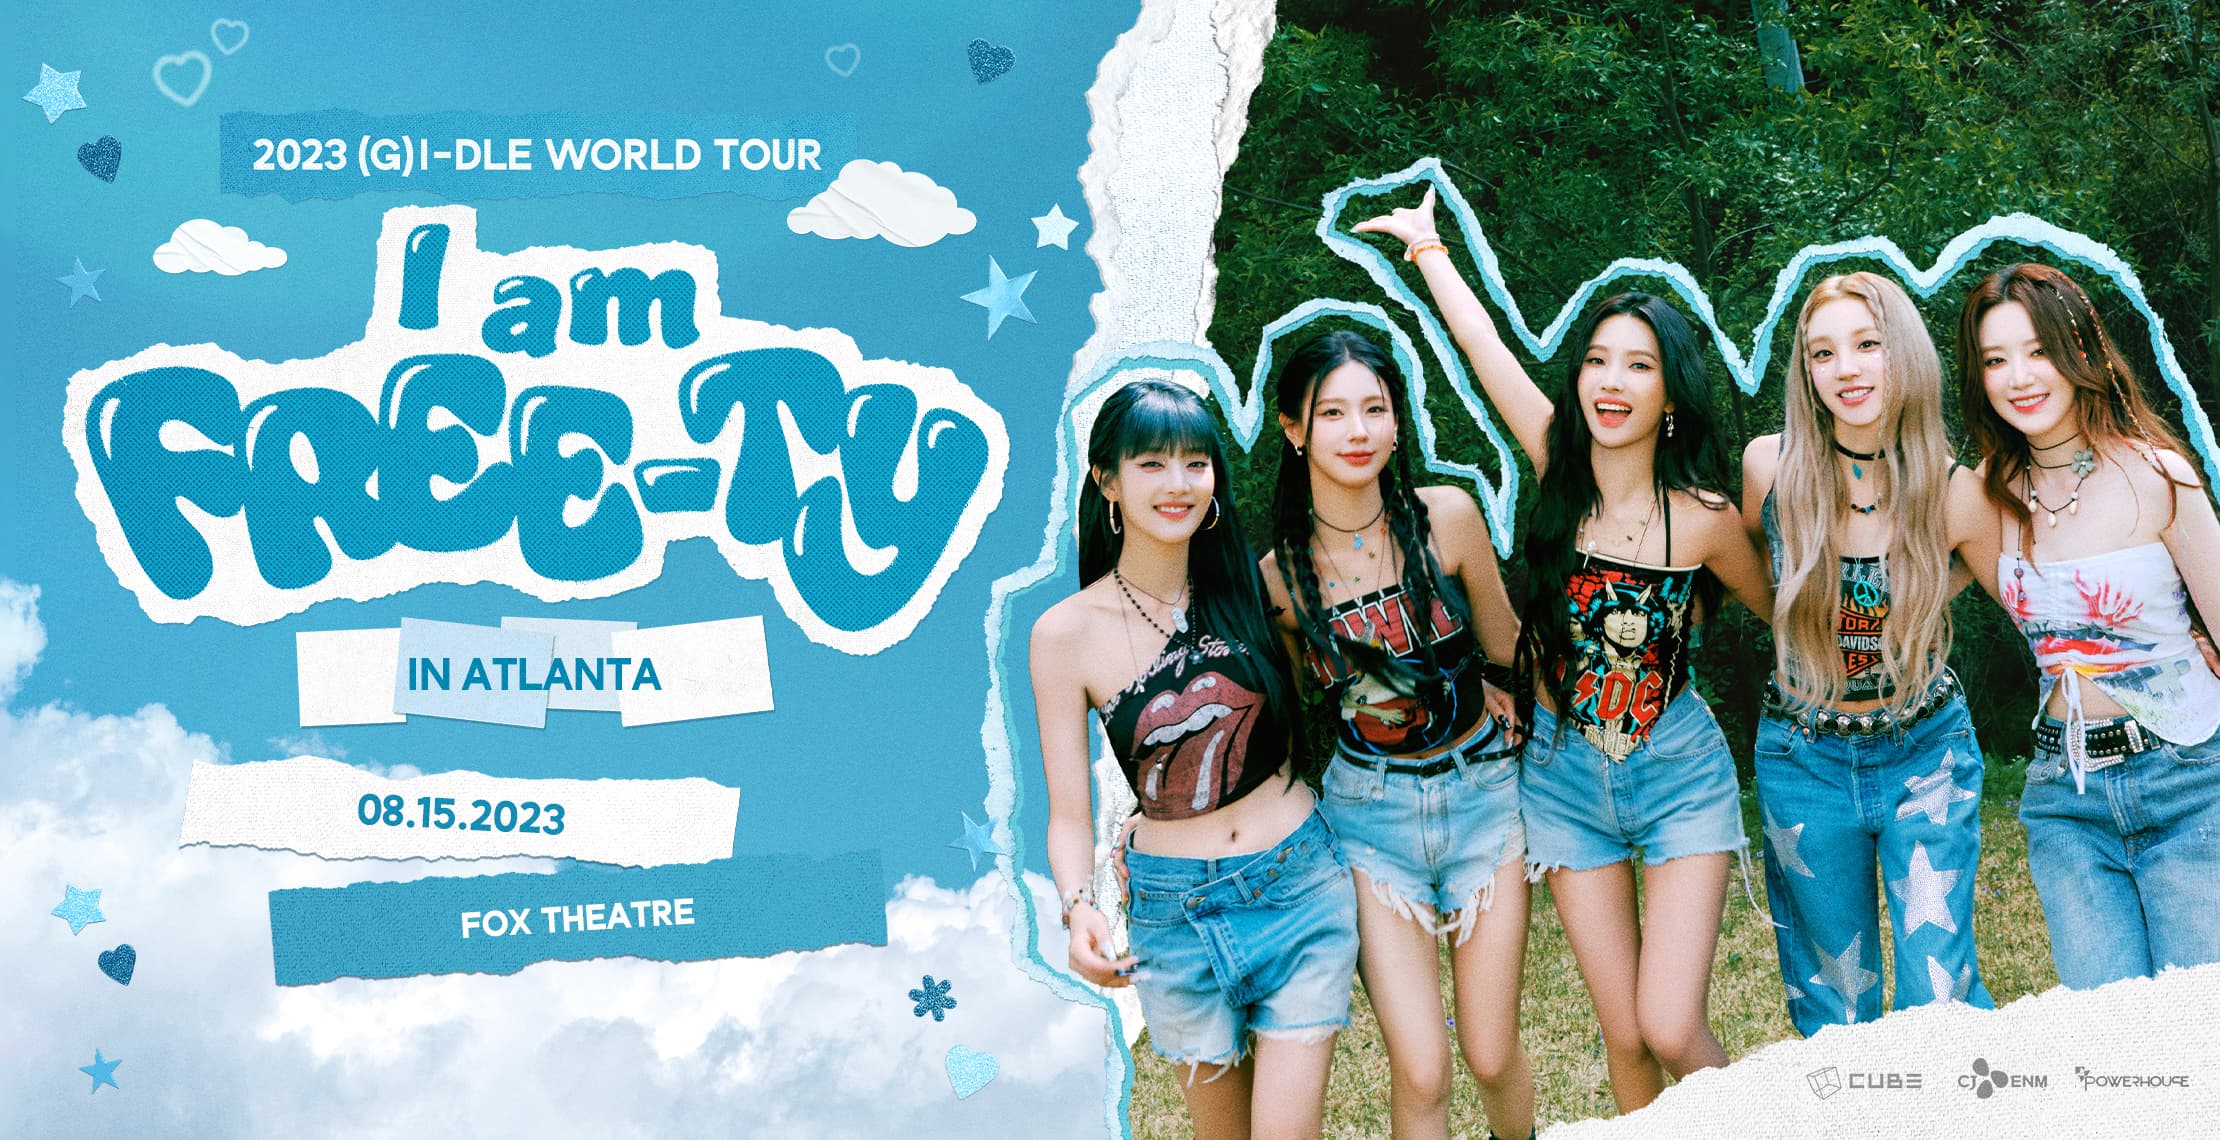 2023 (G)I-DLE WORLD TOUR IN THE U.S.